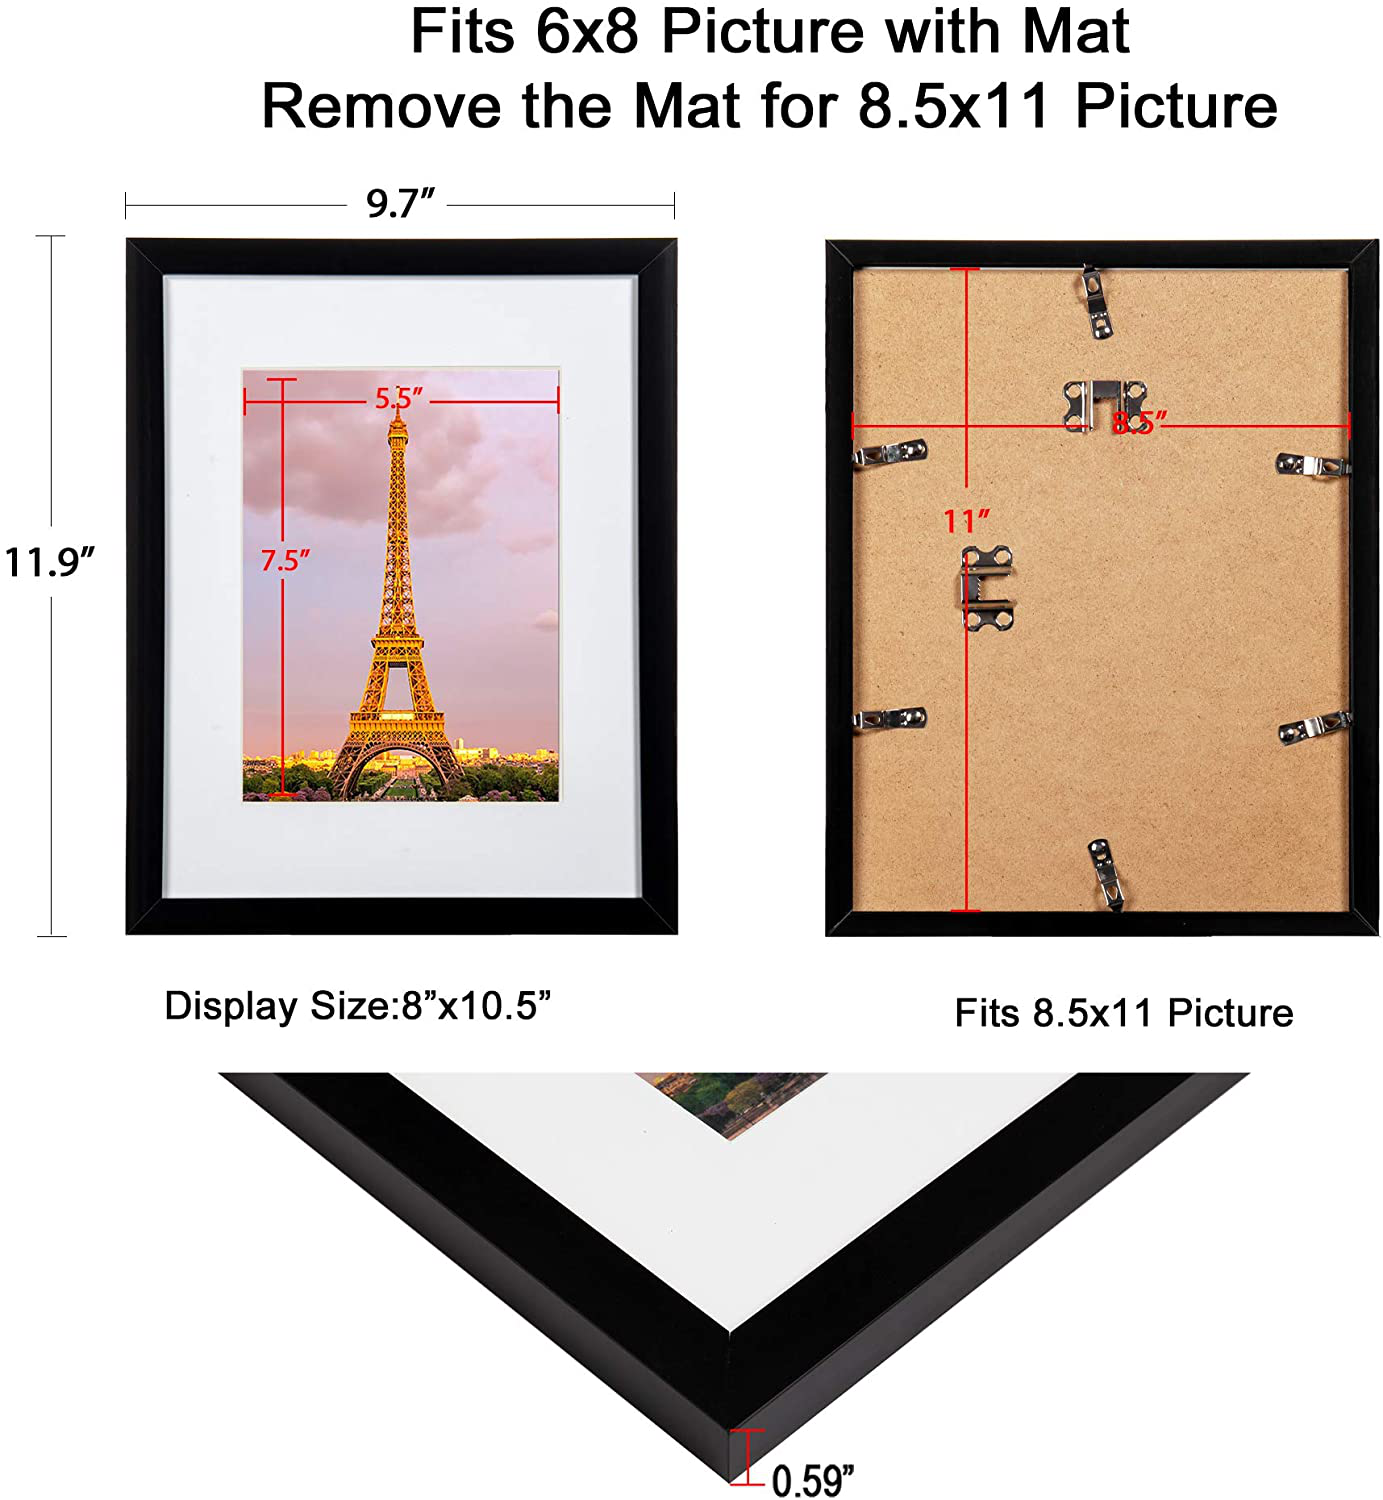 upsimples 8.5x11 Picture Frame Set of 3,Made of High Definition Glass for 6x8 with Mat or 8.5x11 Without Mat,Wall Mounting Photo Frame White